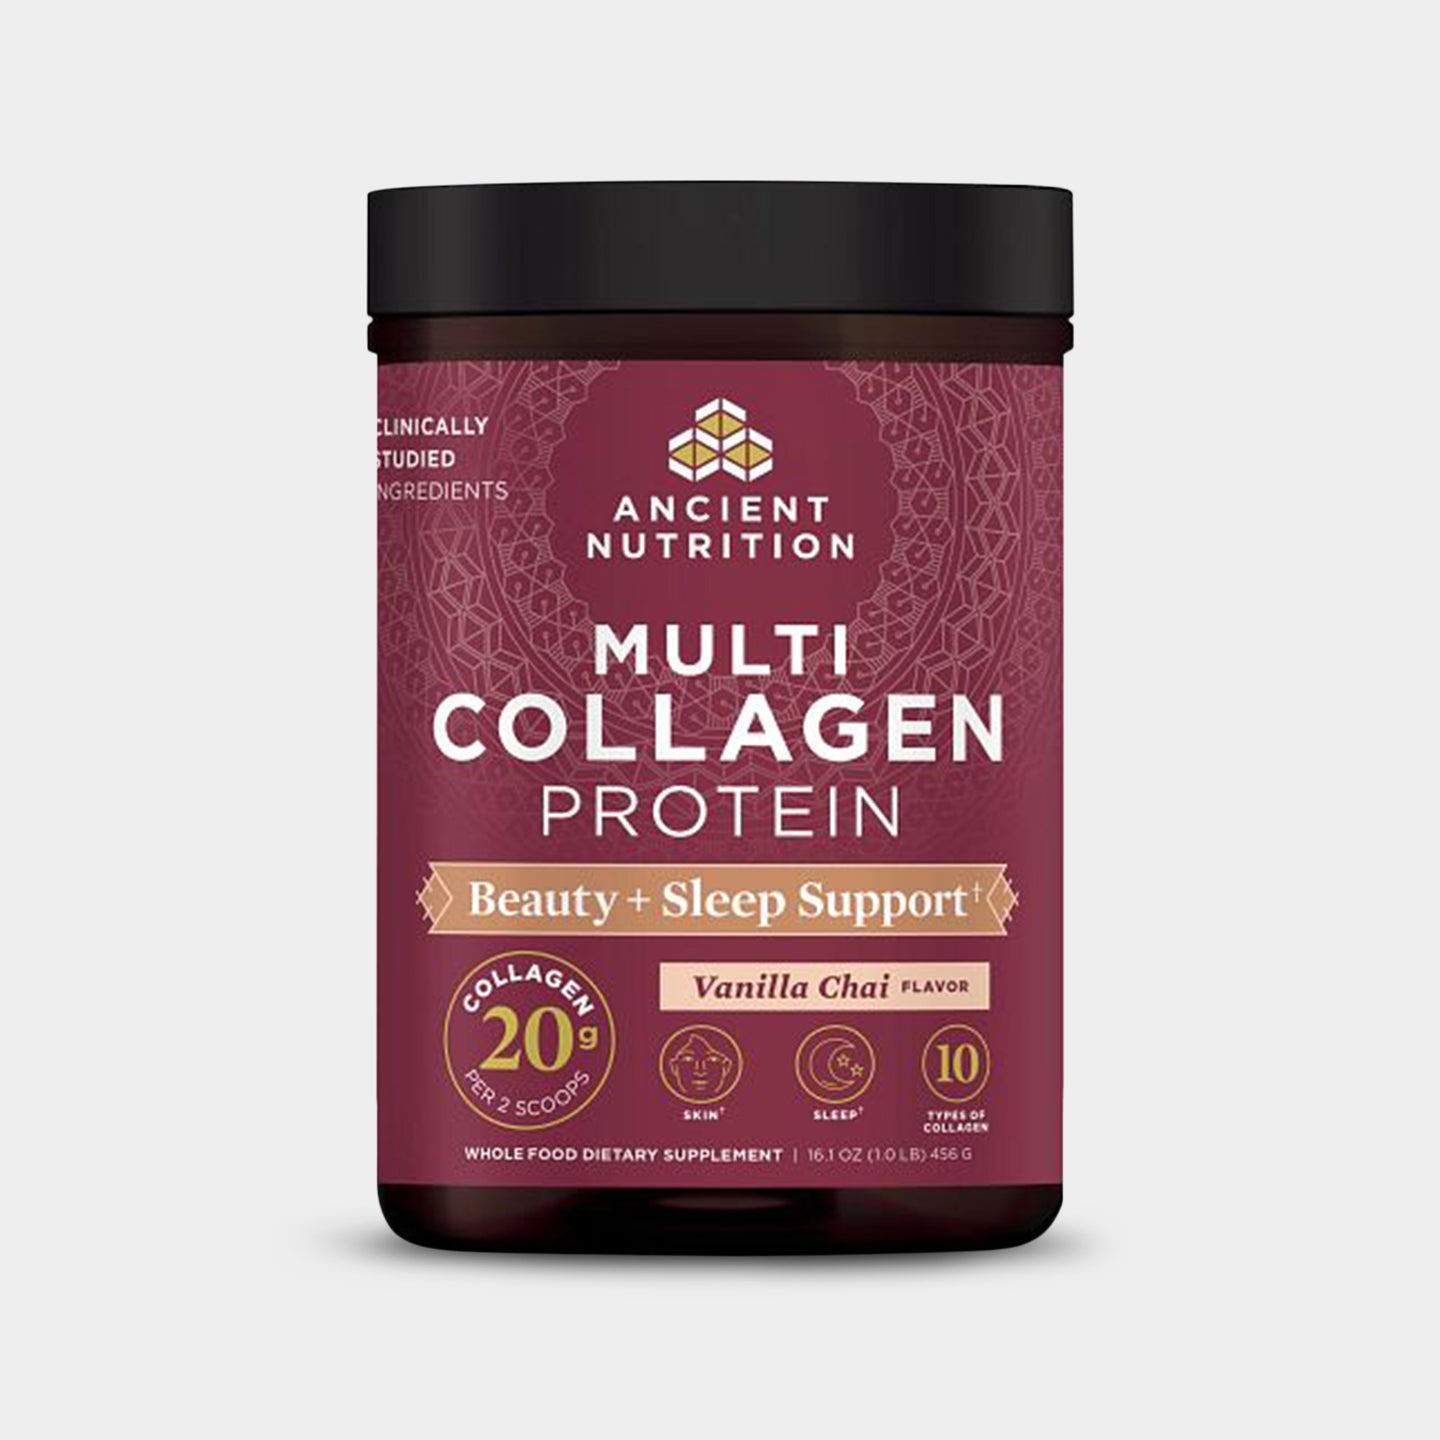 Ancient Nutrition Multi Collagen Protein - Beauty & Sleep Support A1